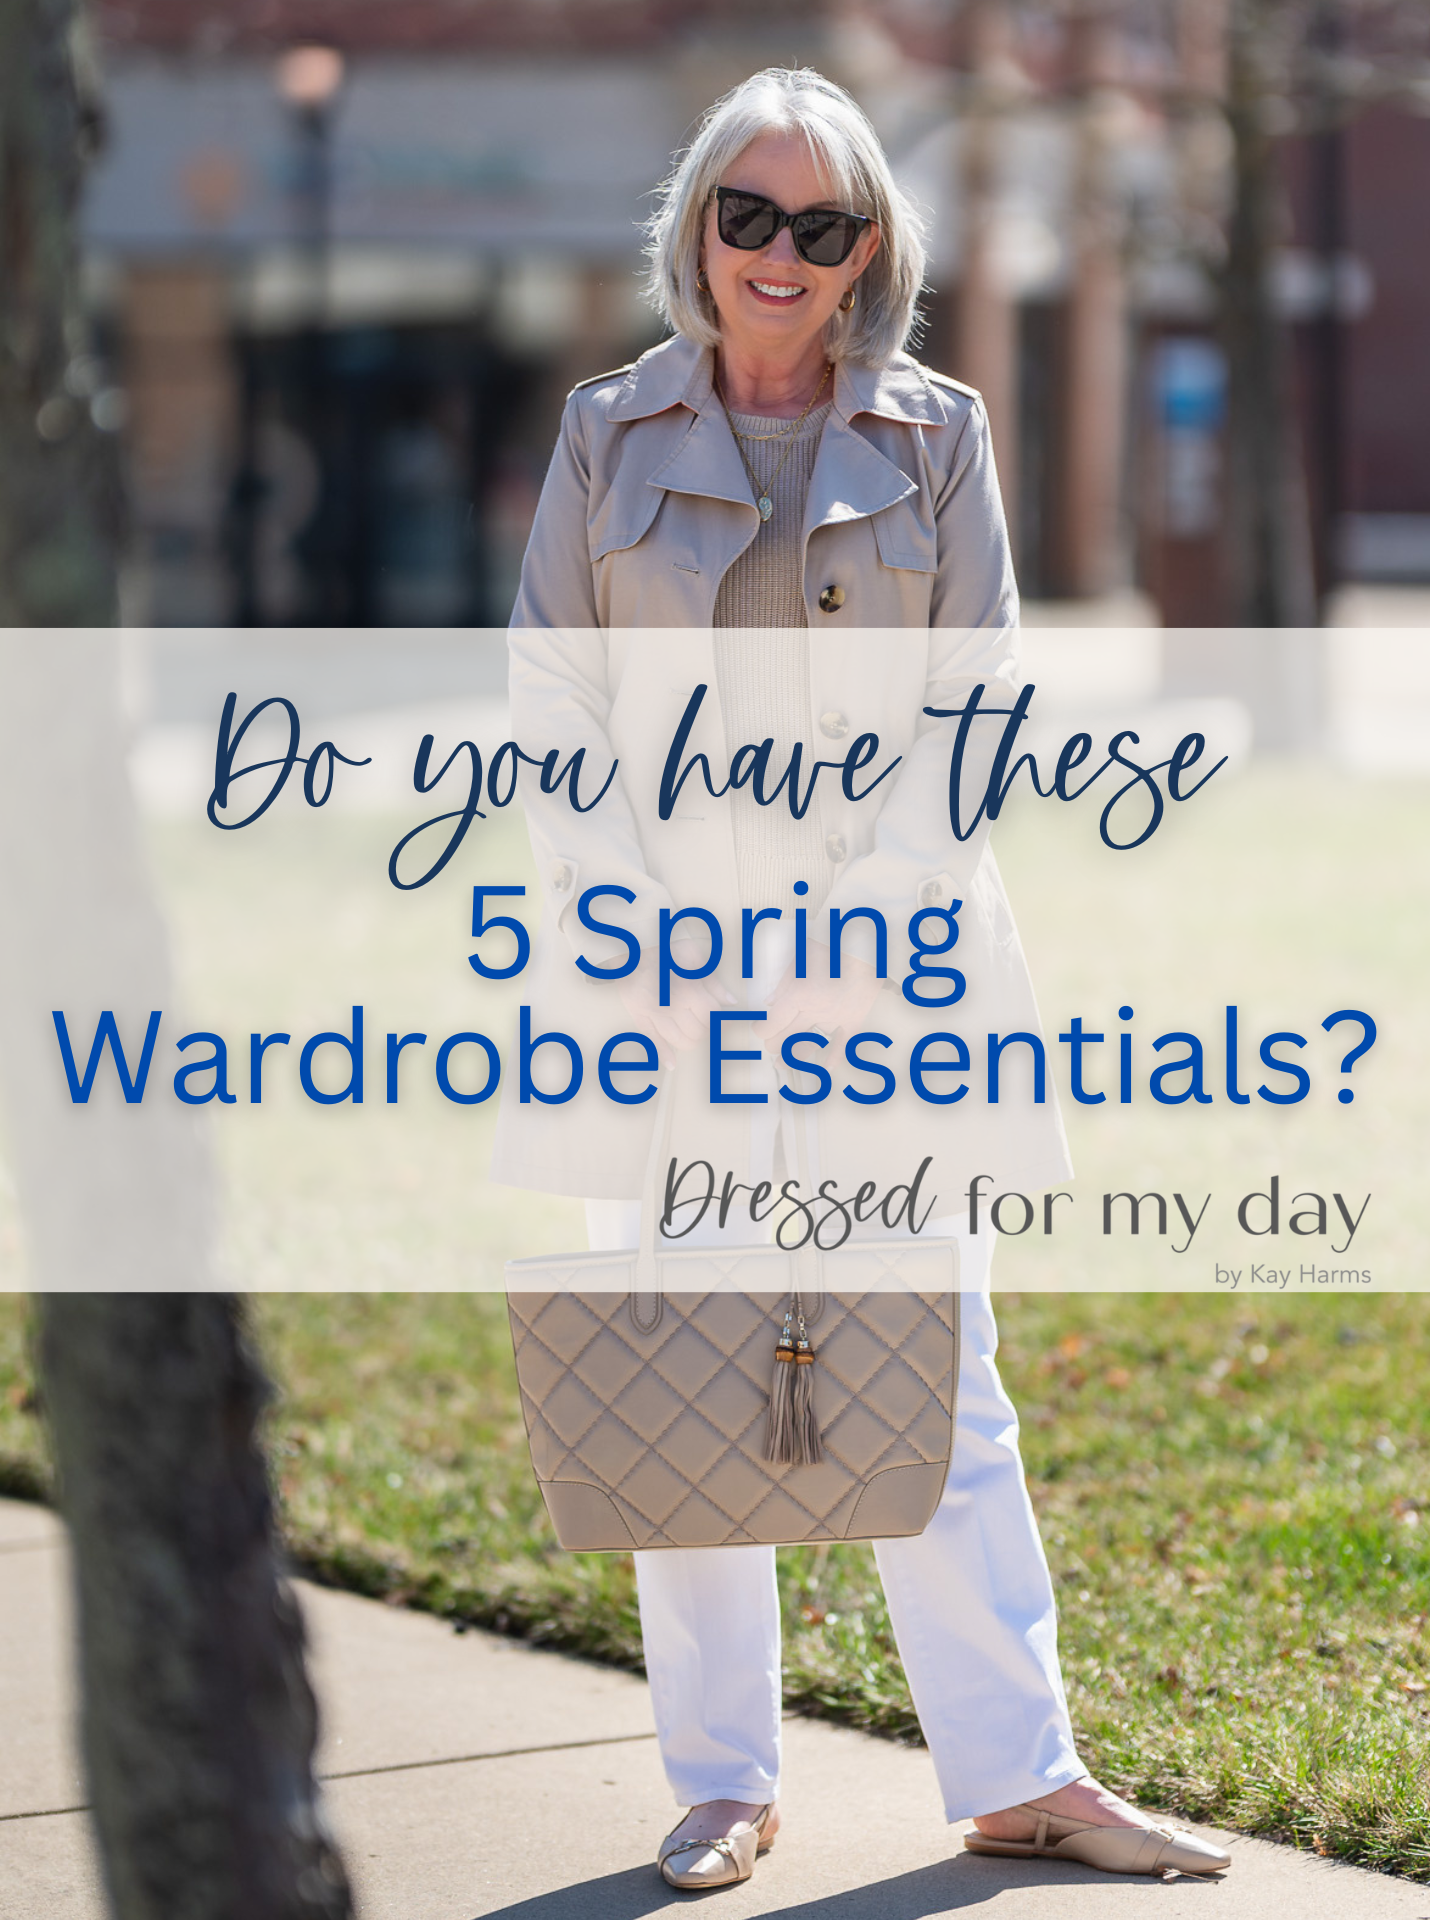 Do You Have These 5 Spring Wardrobe Essentials?